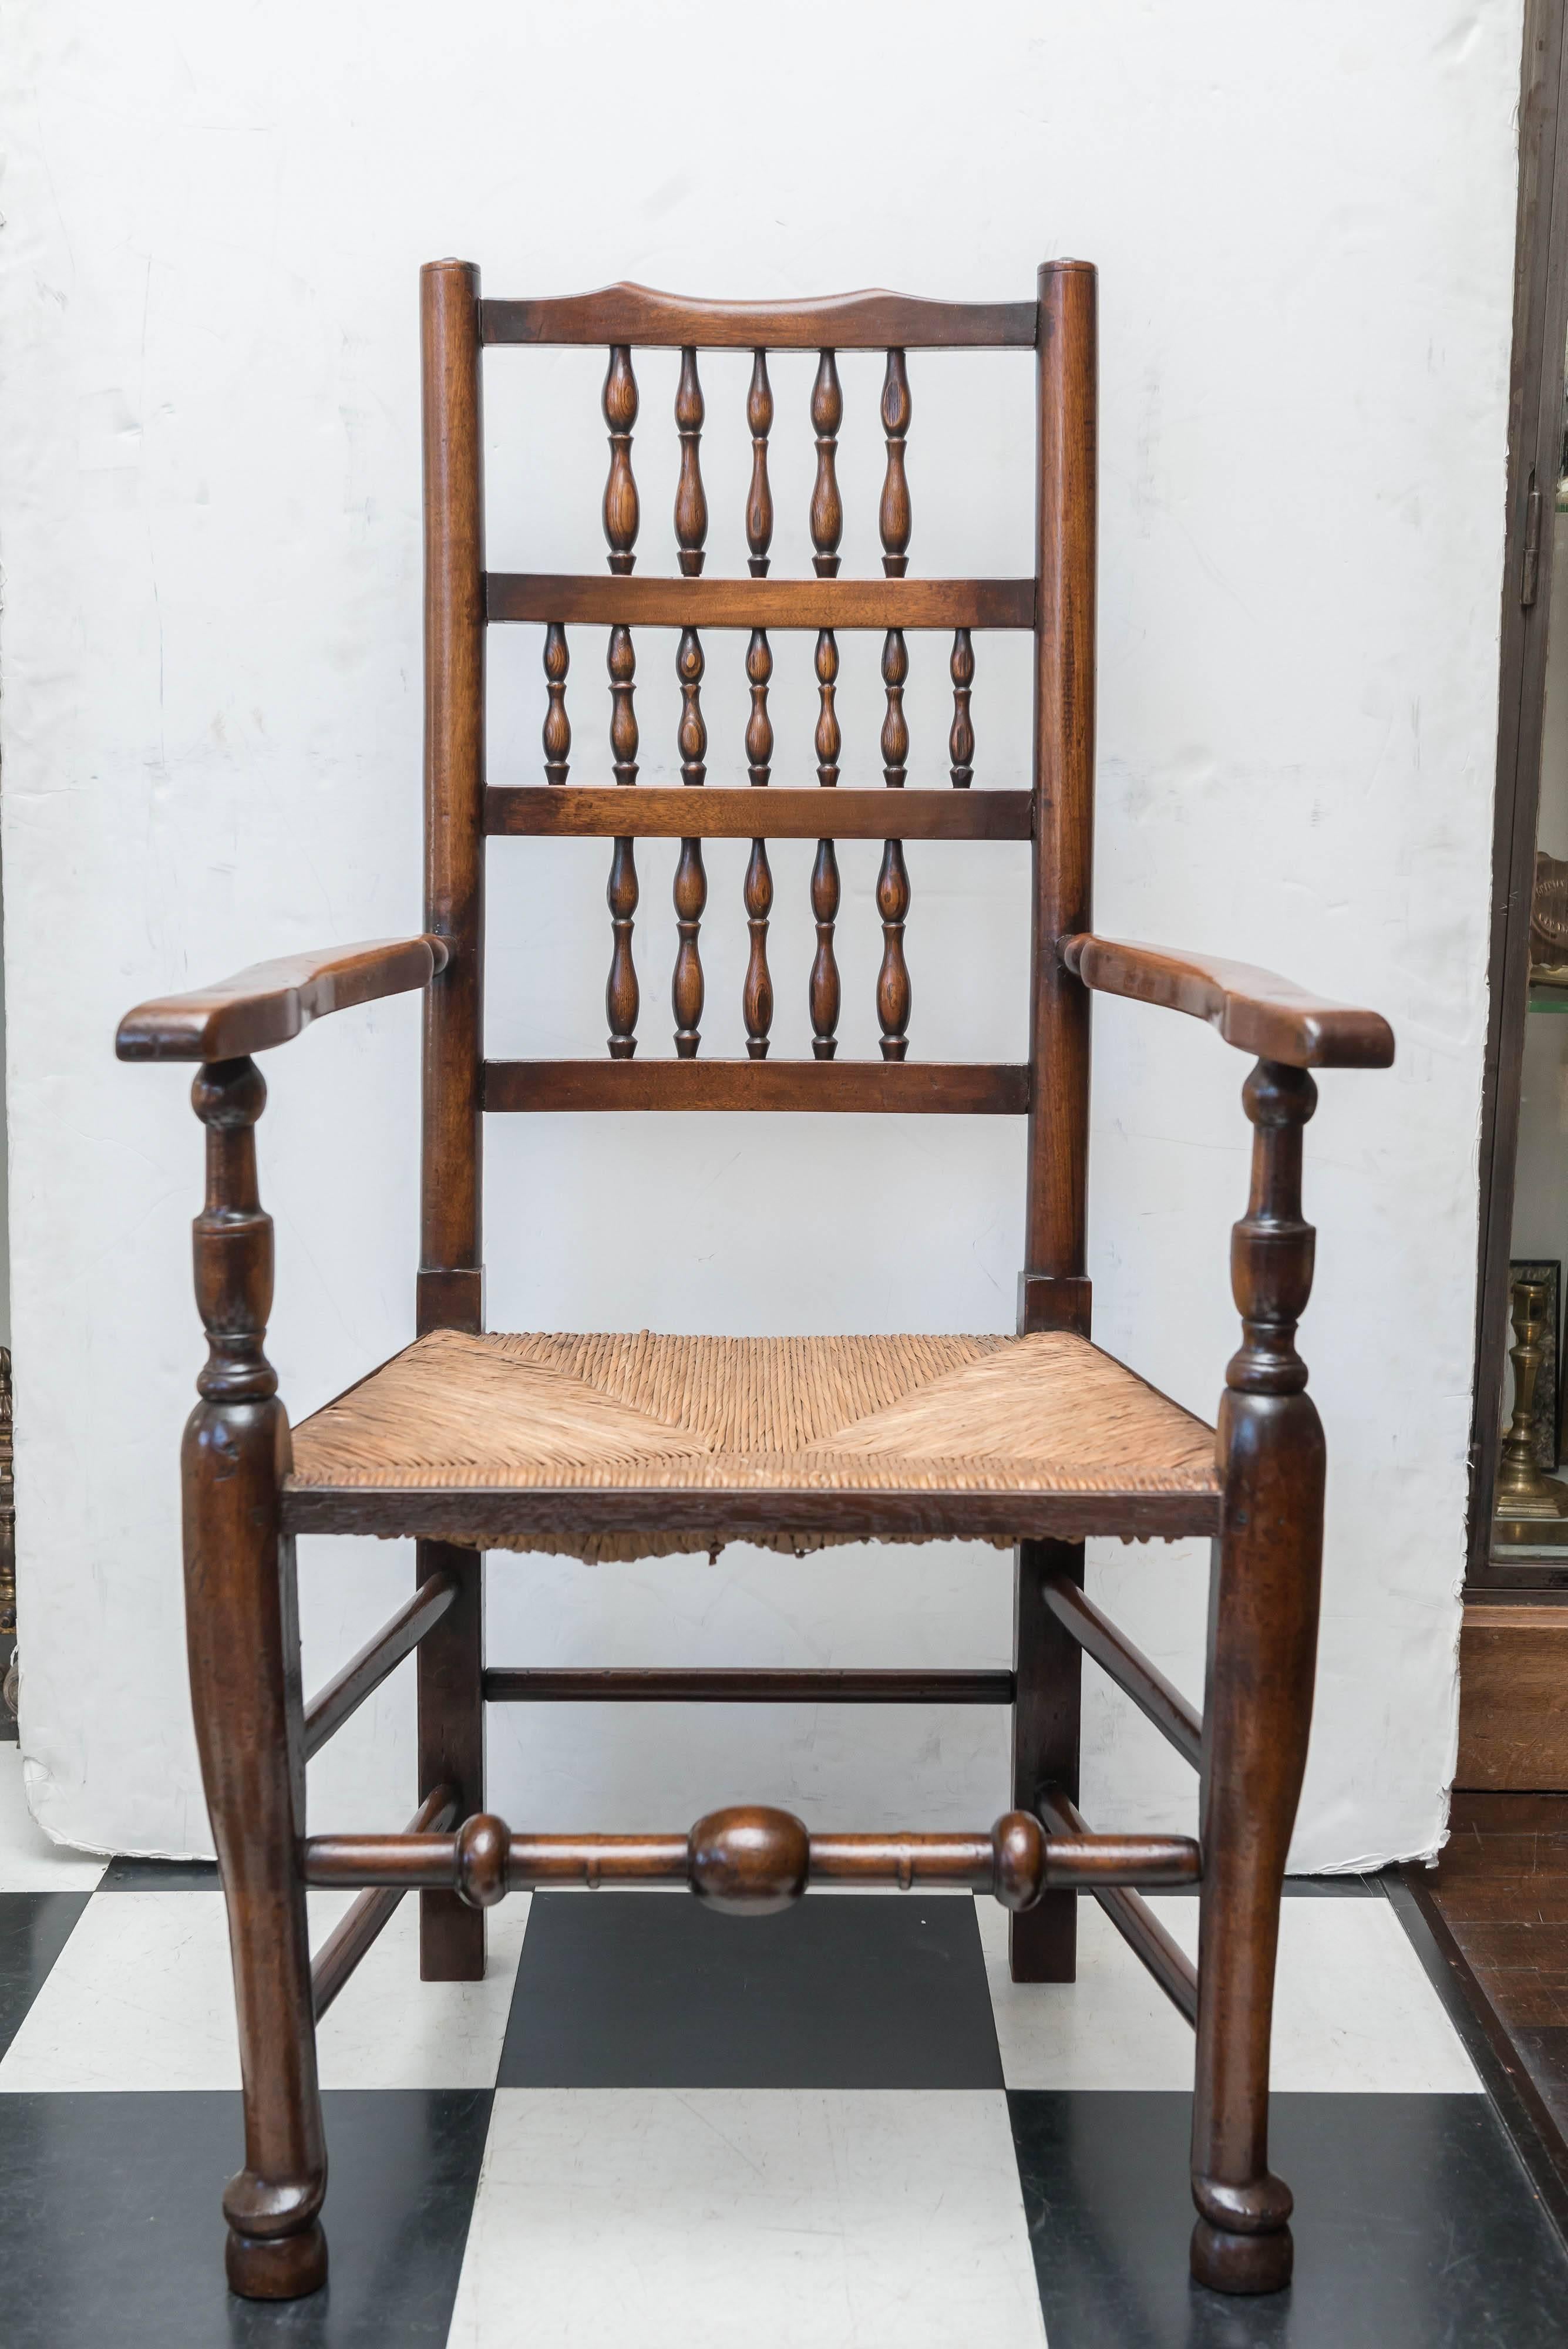 A set of eight late 18th-early 19th century English ladder back, rush seat, chairs, circa 1800. Two arm / master chairs and six side chairs.
Walnut and elm with rush seats. All all the old repairs and tipped feet very well done and solid. Never